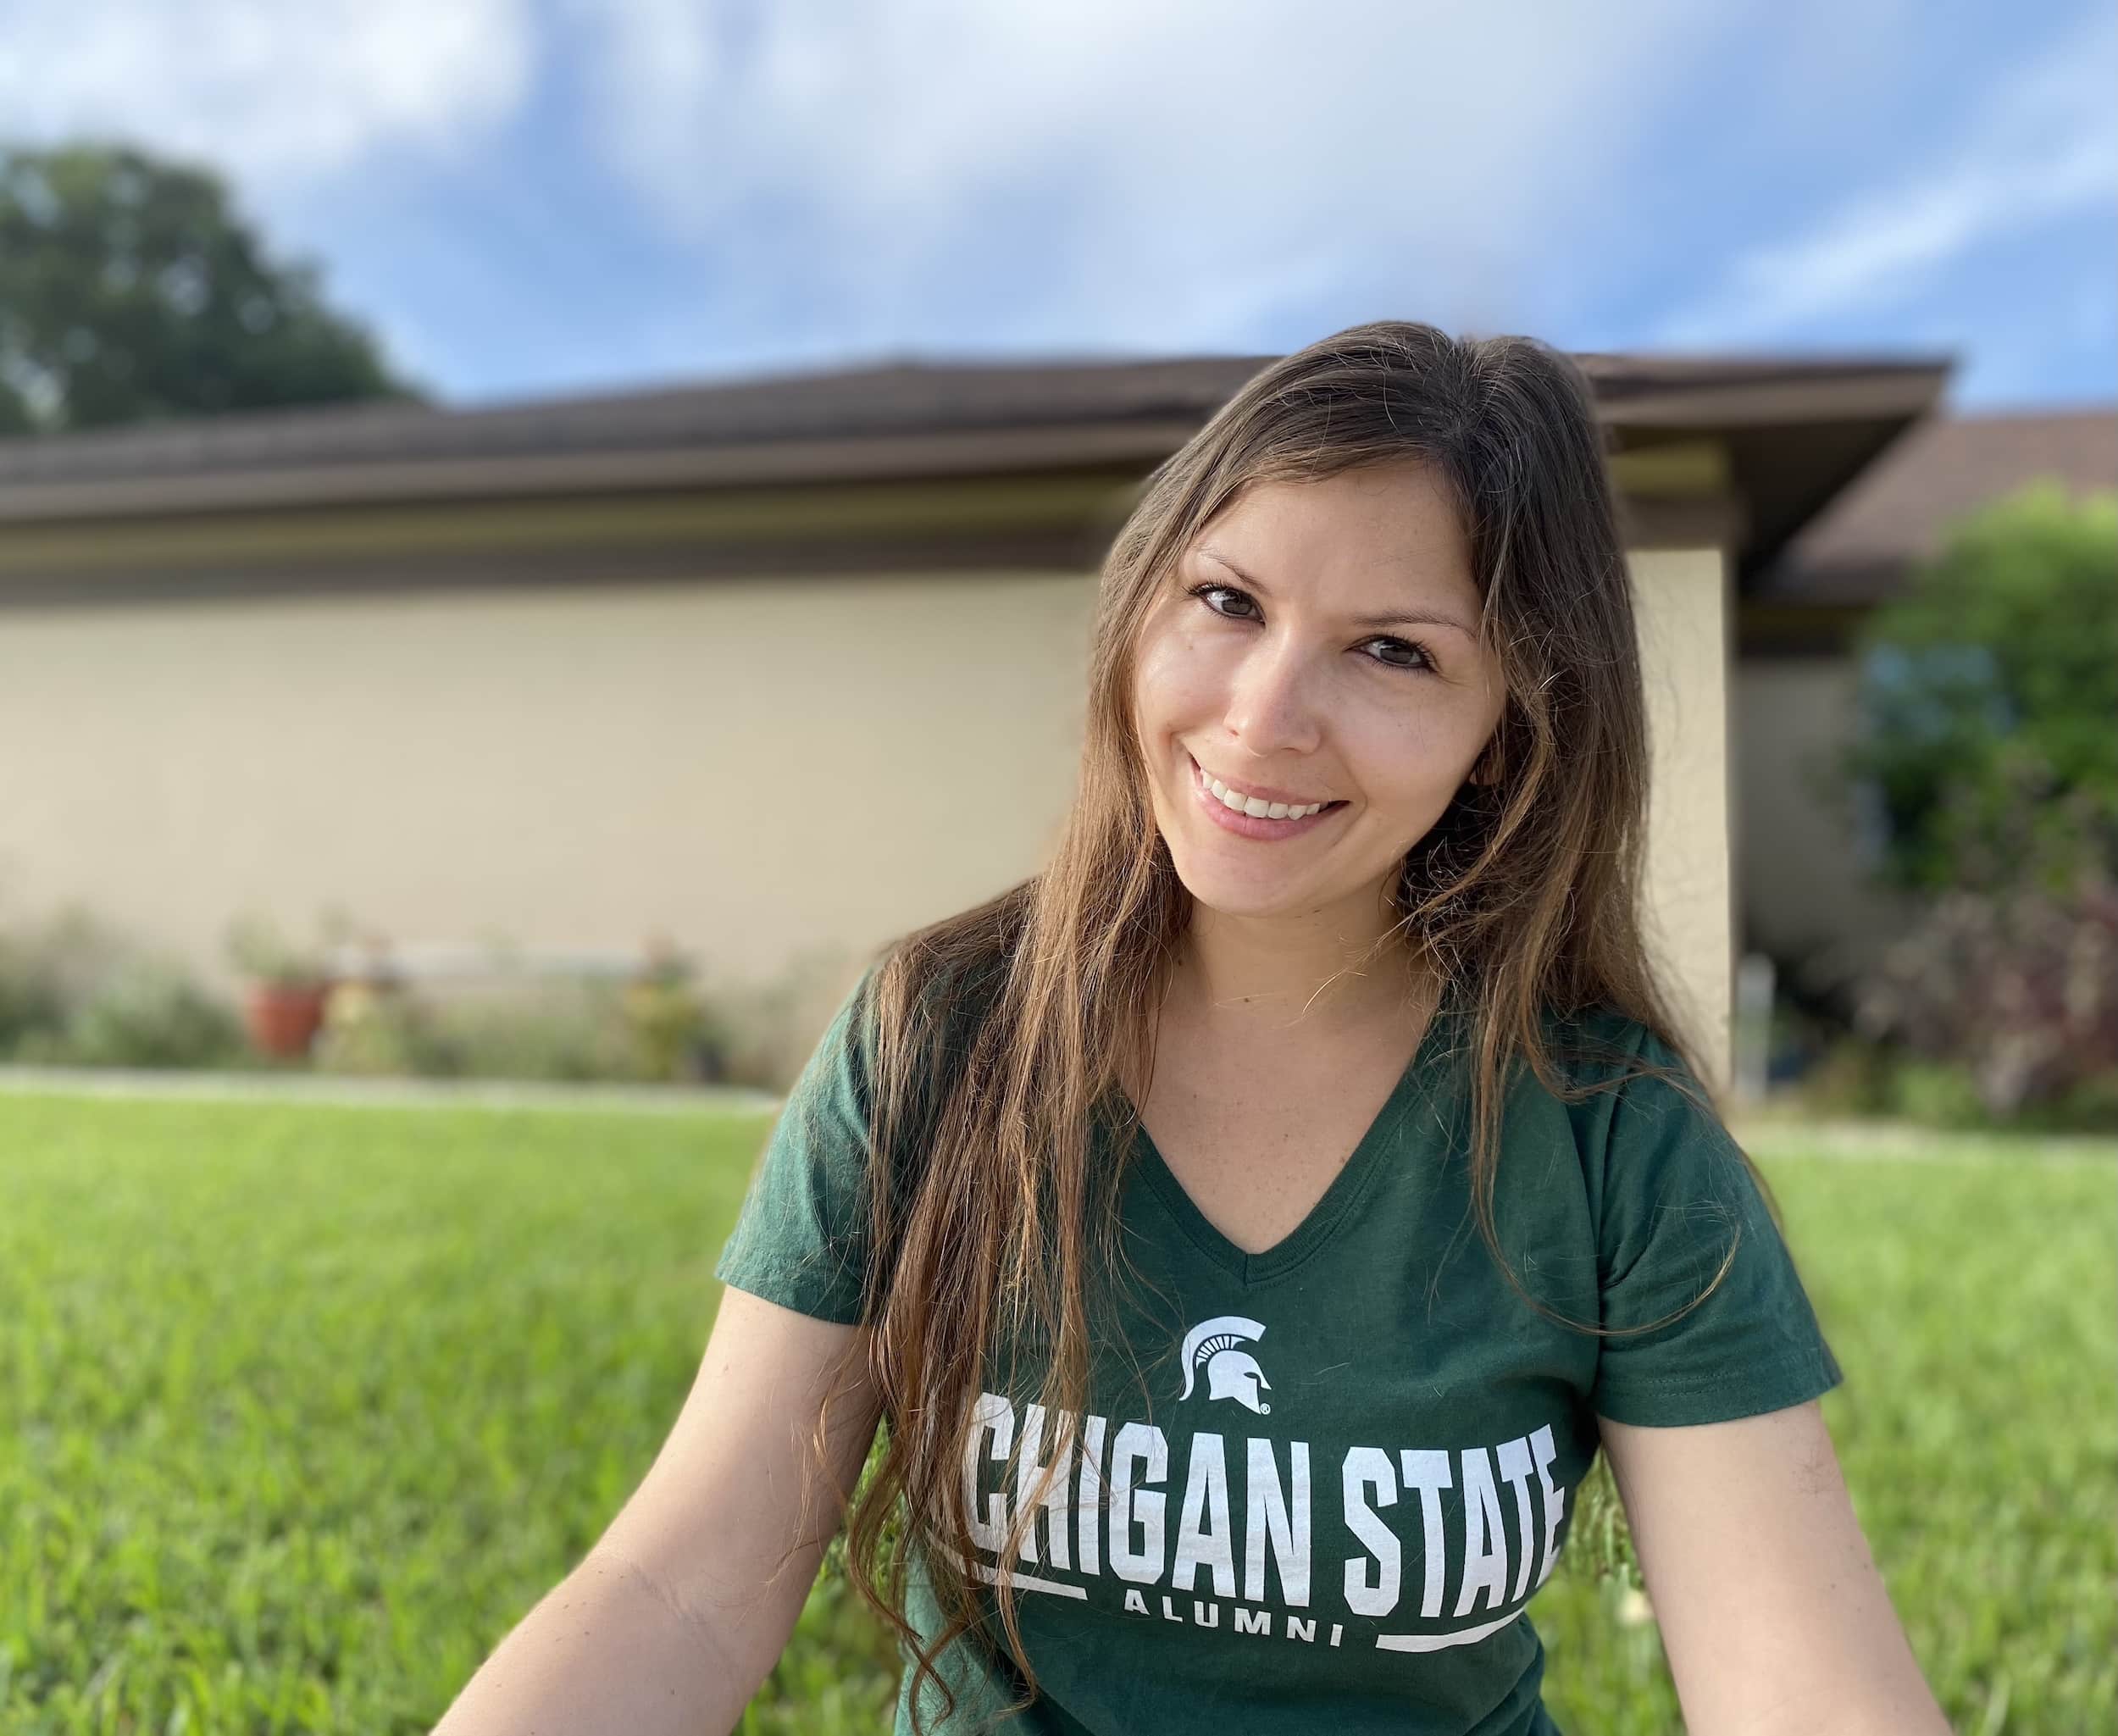 Photo of Lori Klymko-Pickup-Crawford, the author of this page, sitting in the grass in front of a house wearing a green MSU shirt.